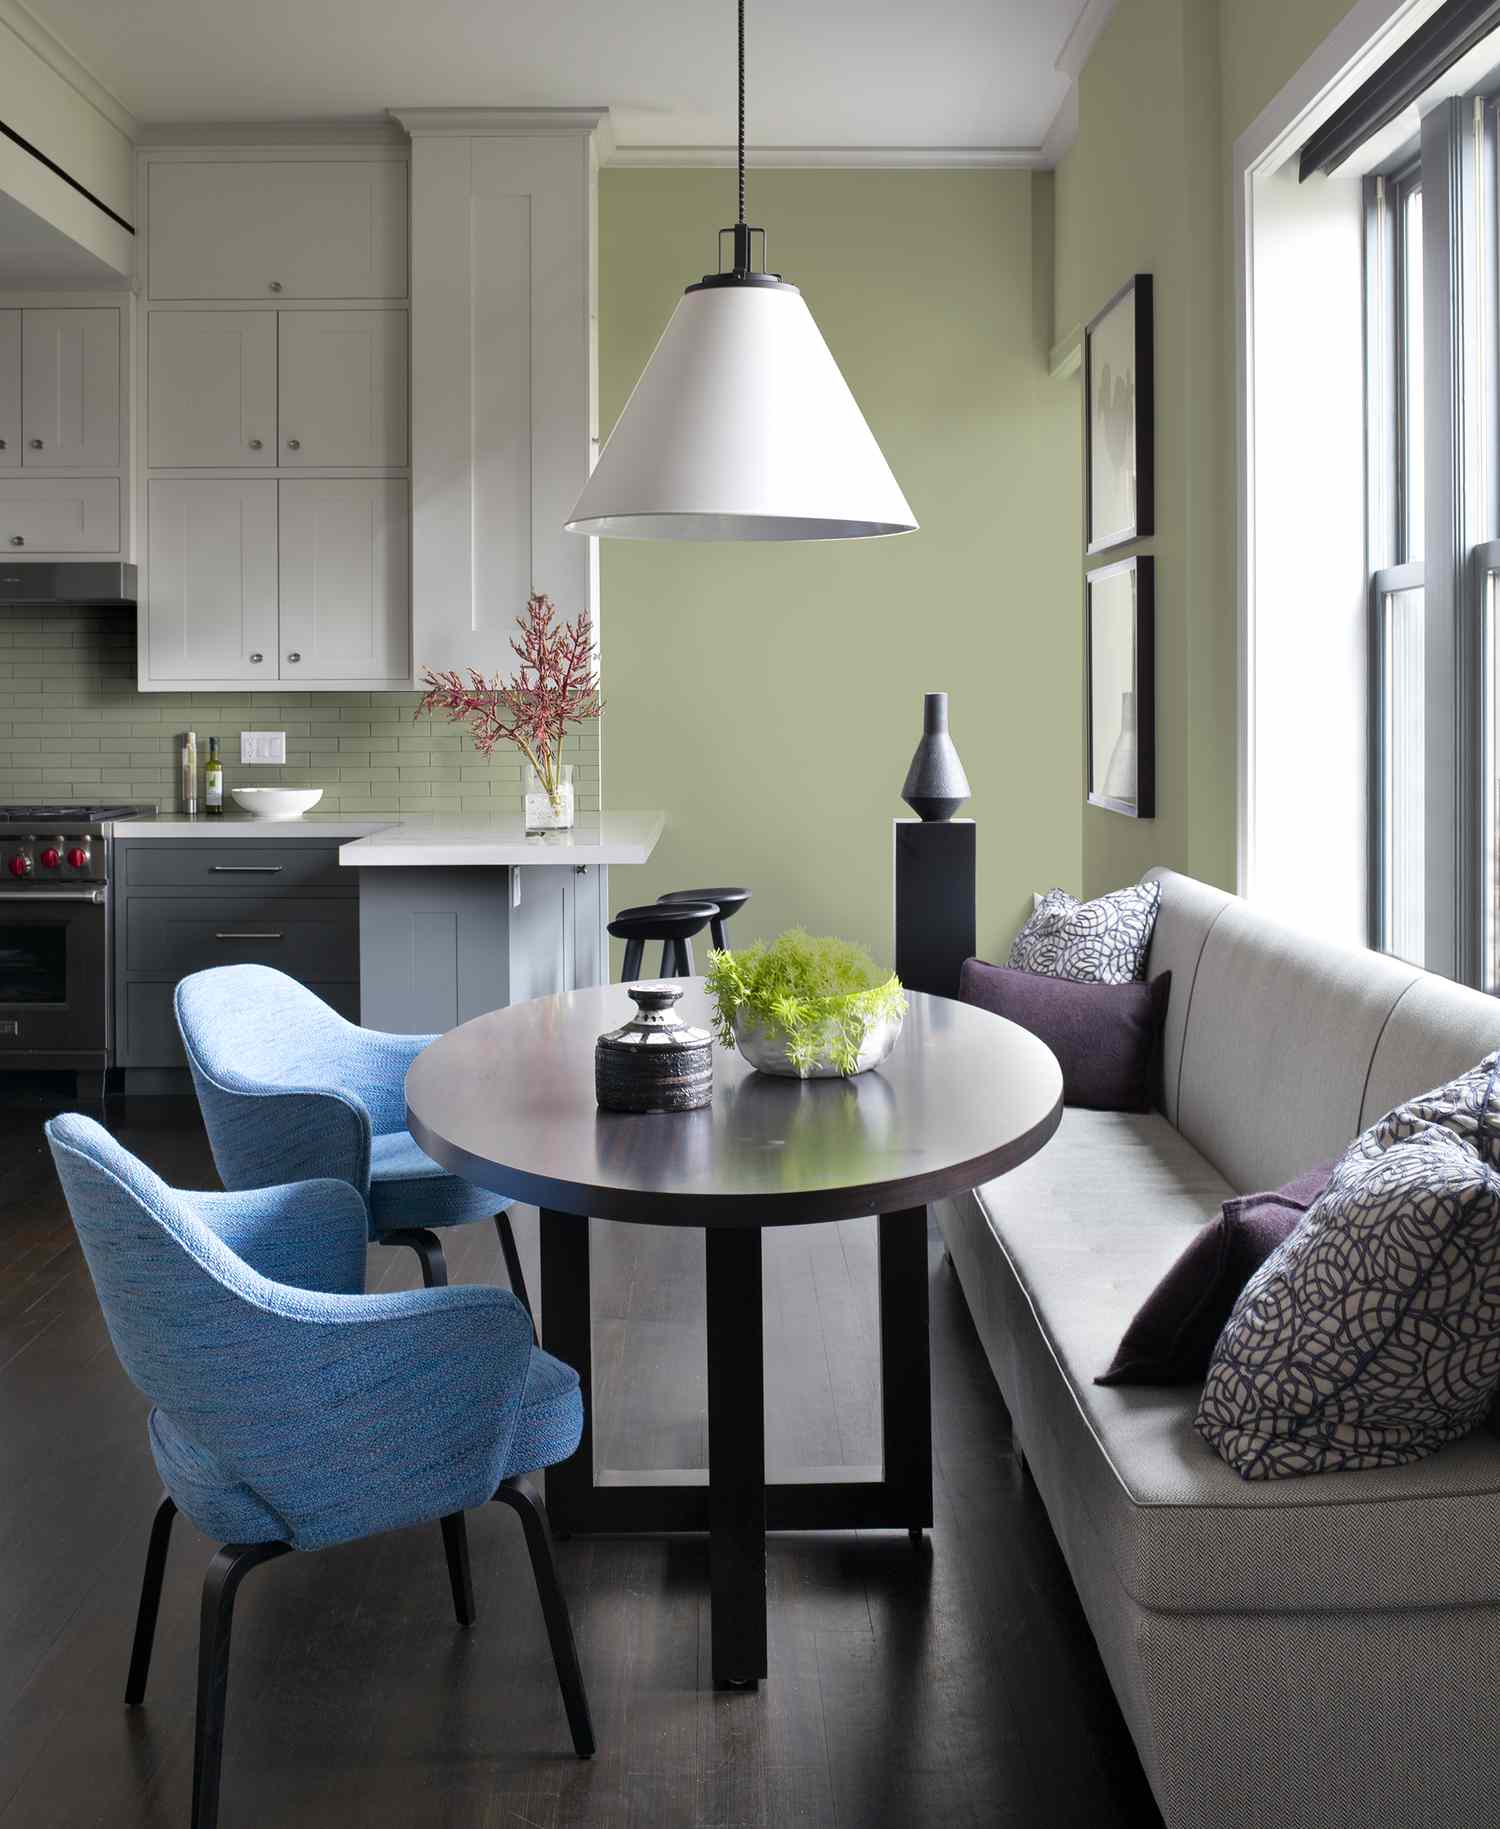 olive sprig is ppg's 2022 color of the year